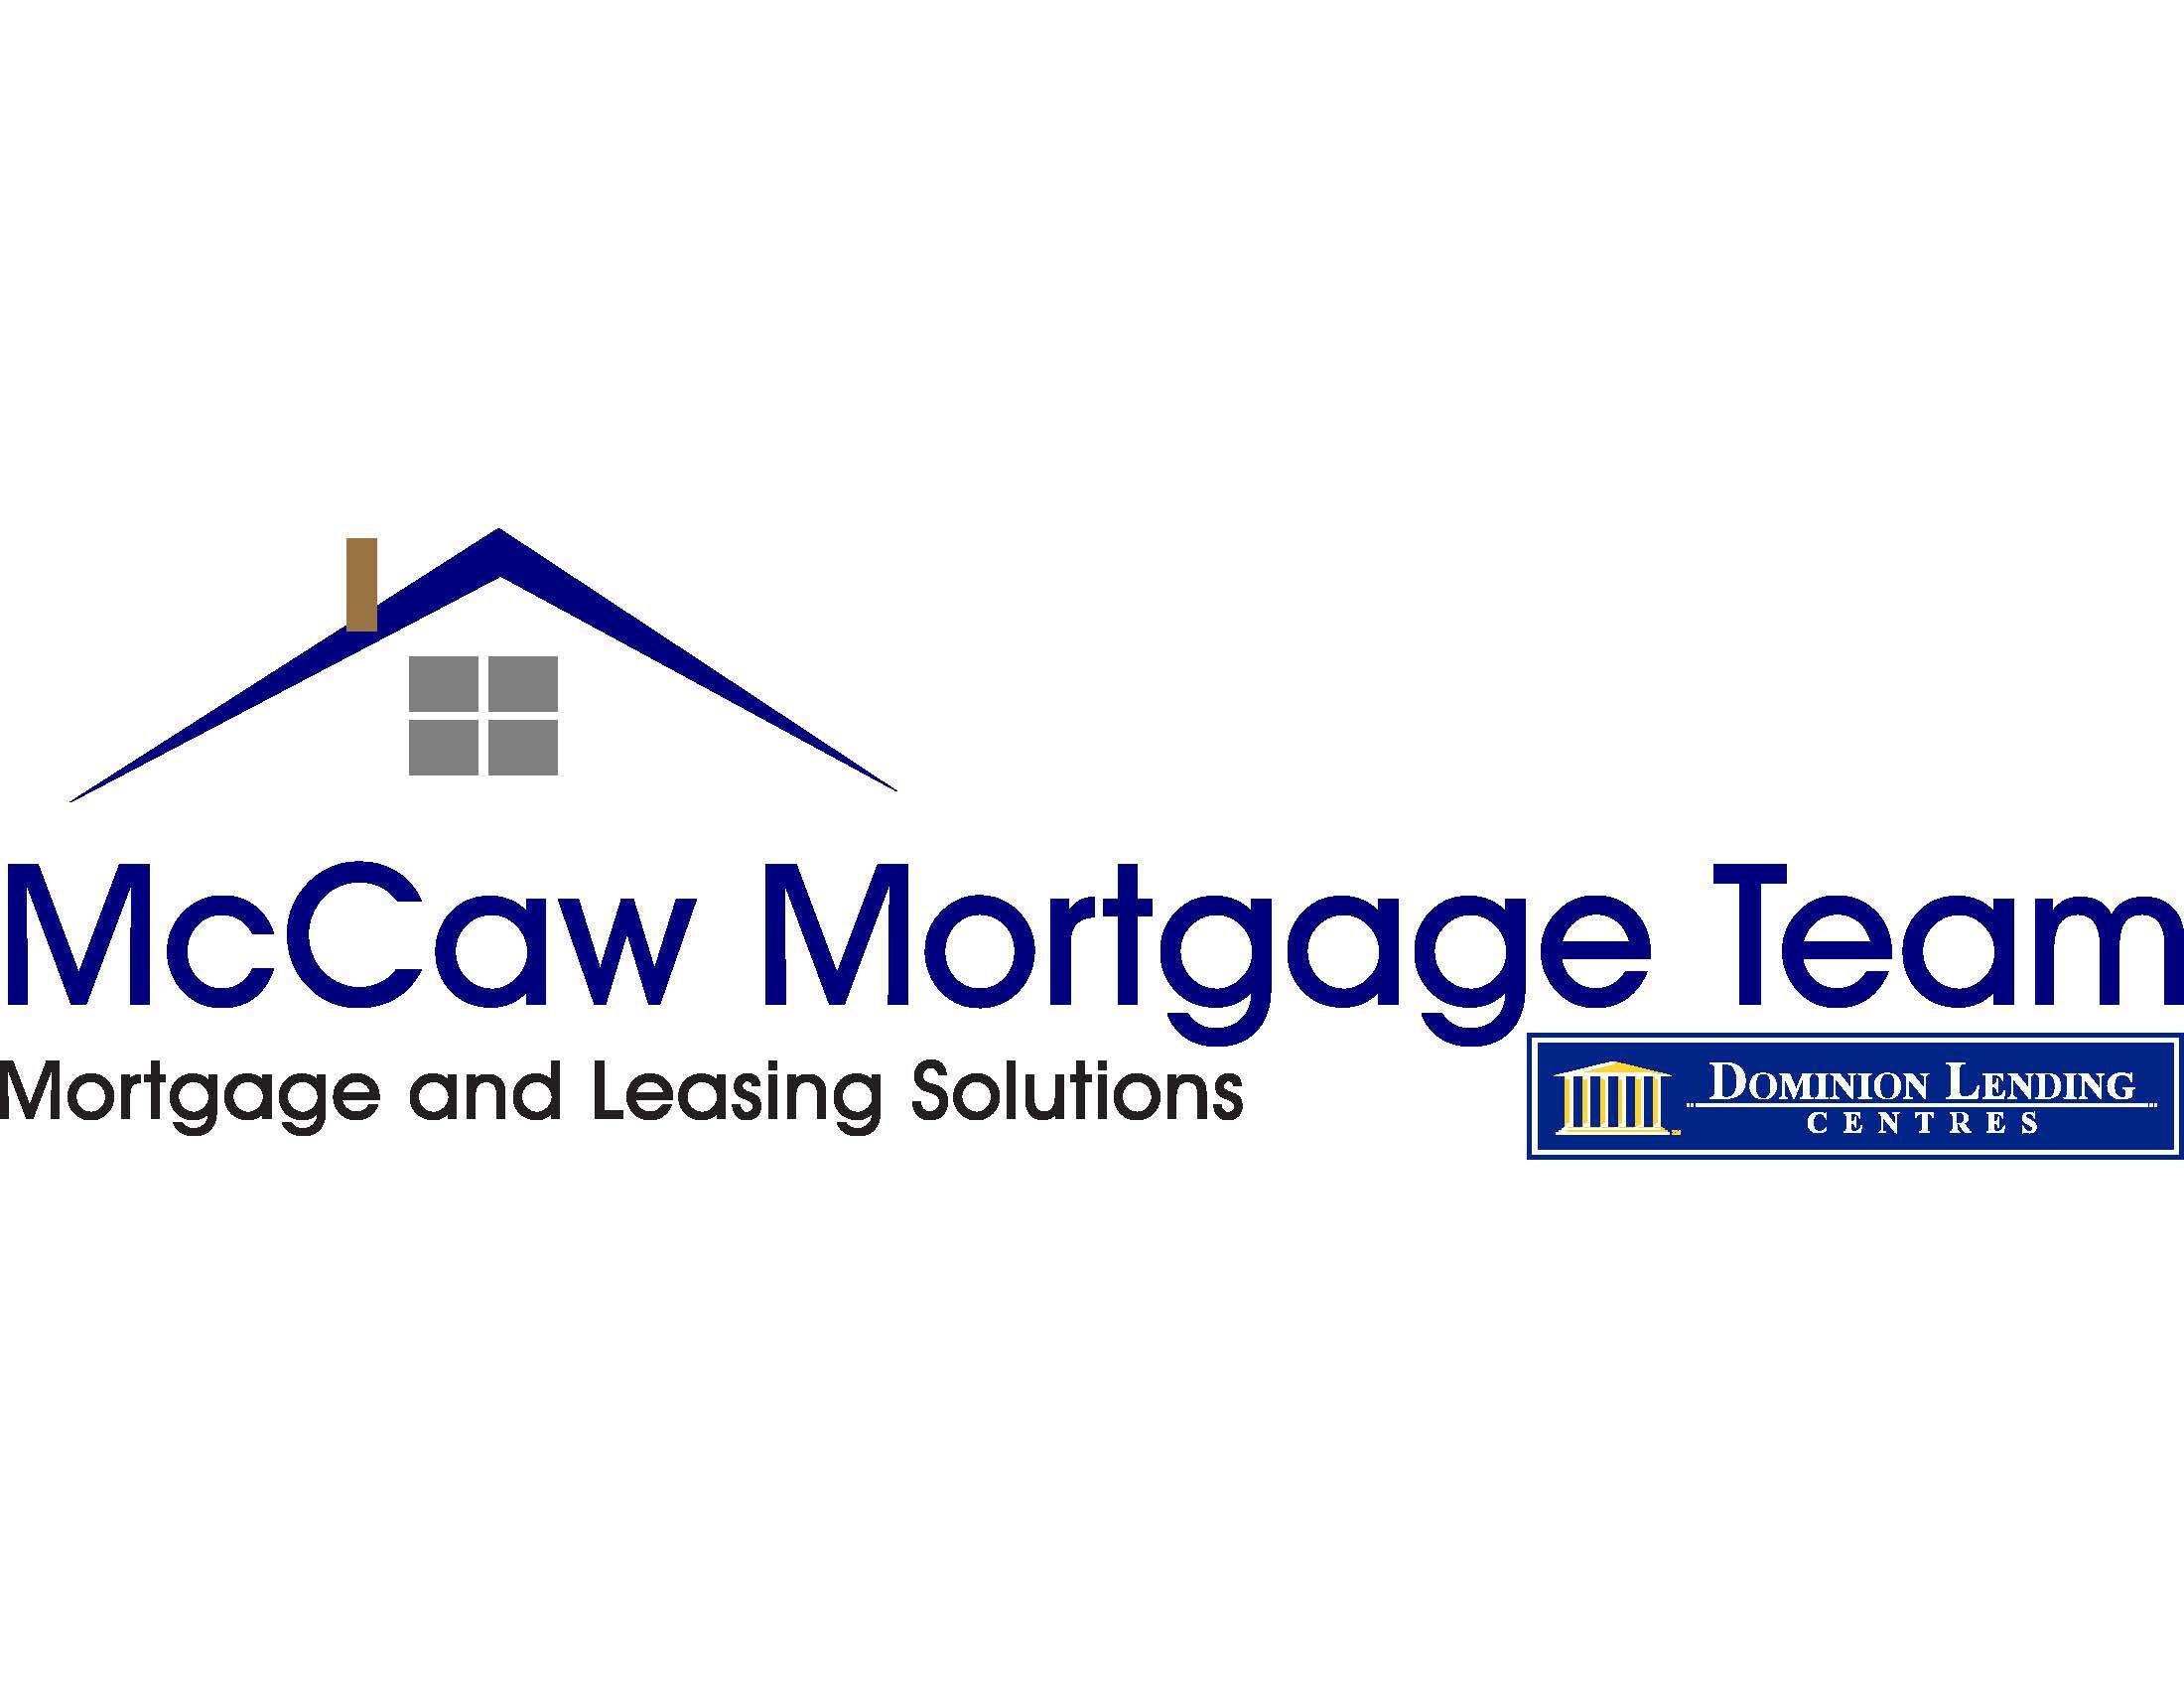 McCaw Mortgages